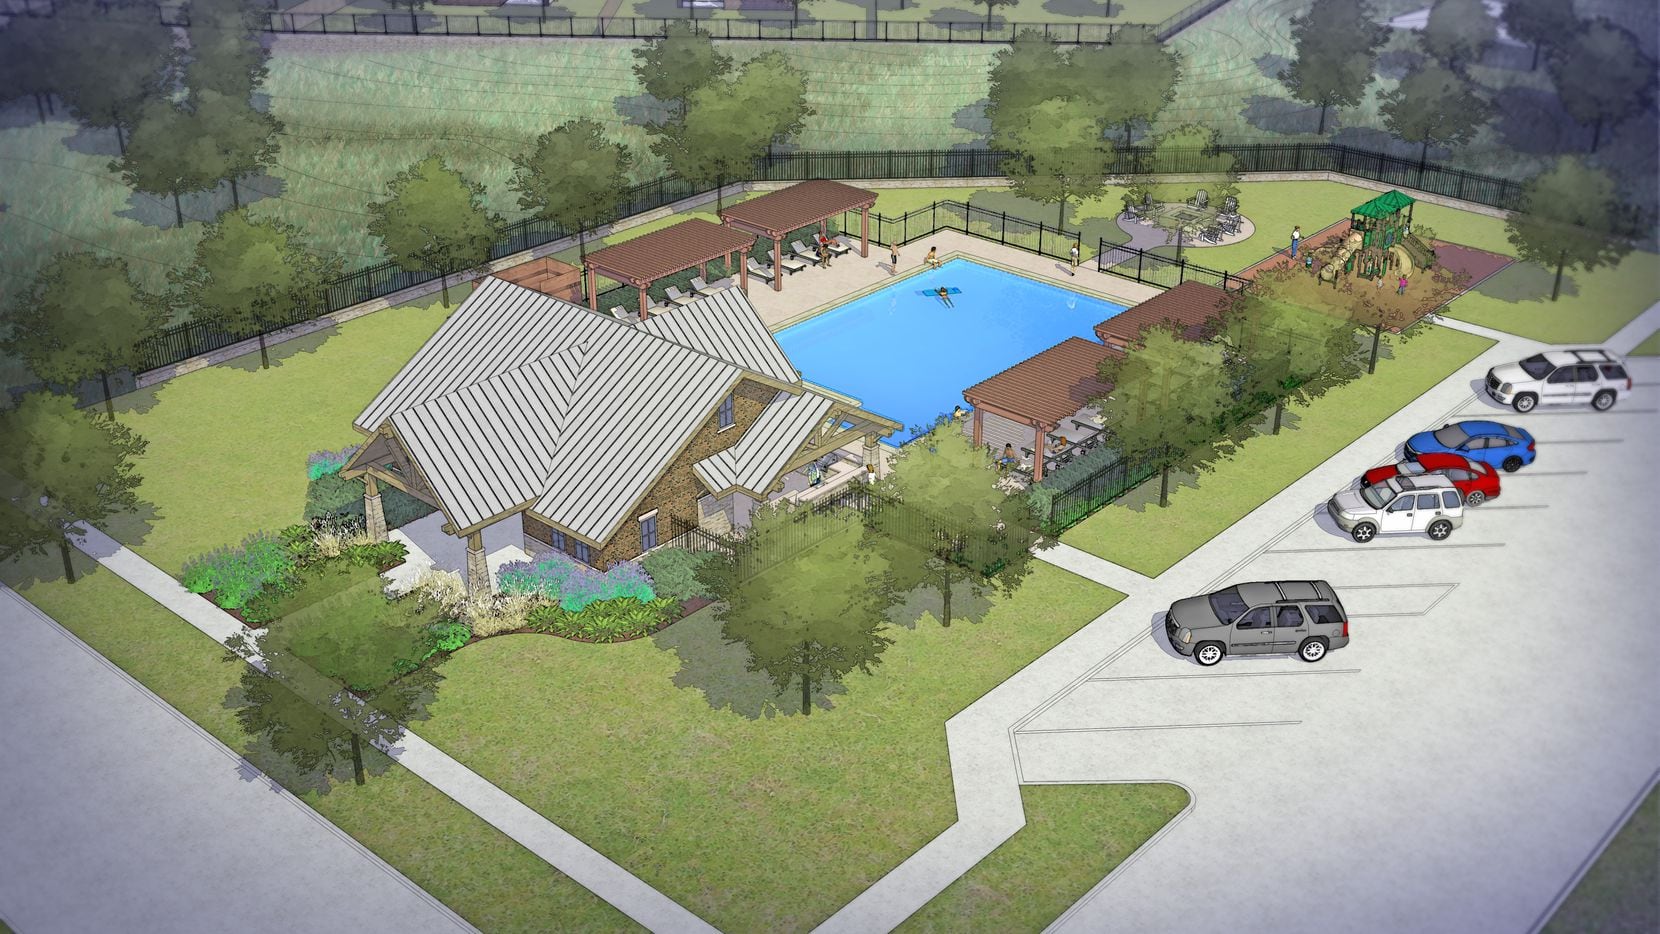 The Frisco Springs project will have an amenity center with a pool for residents.